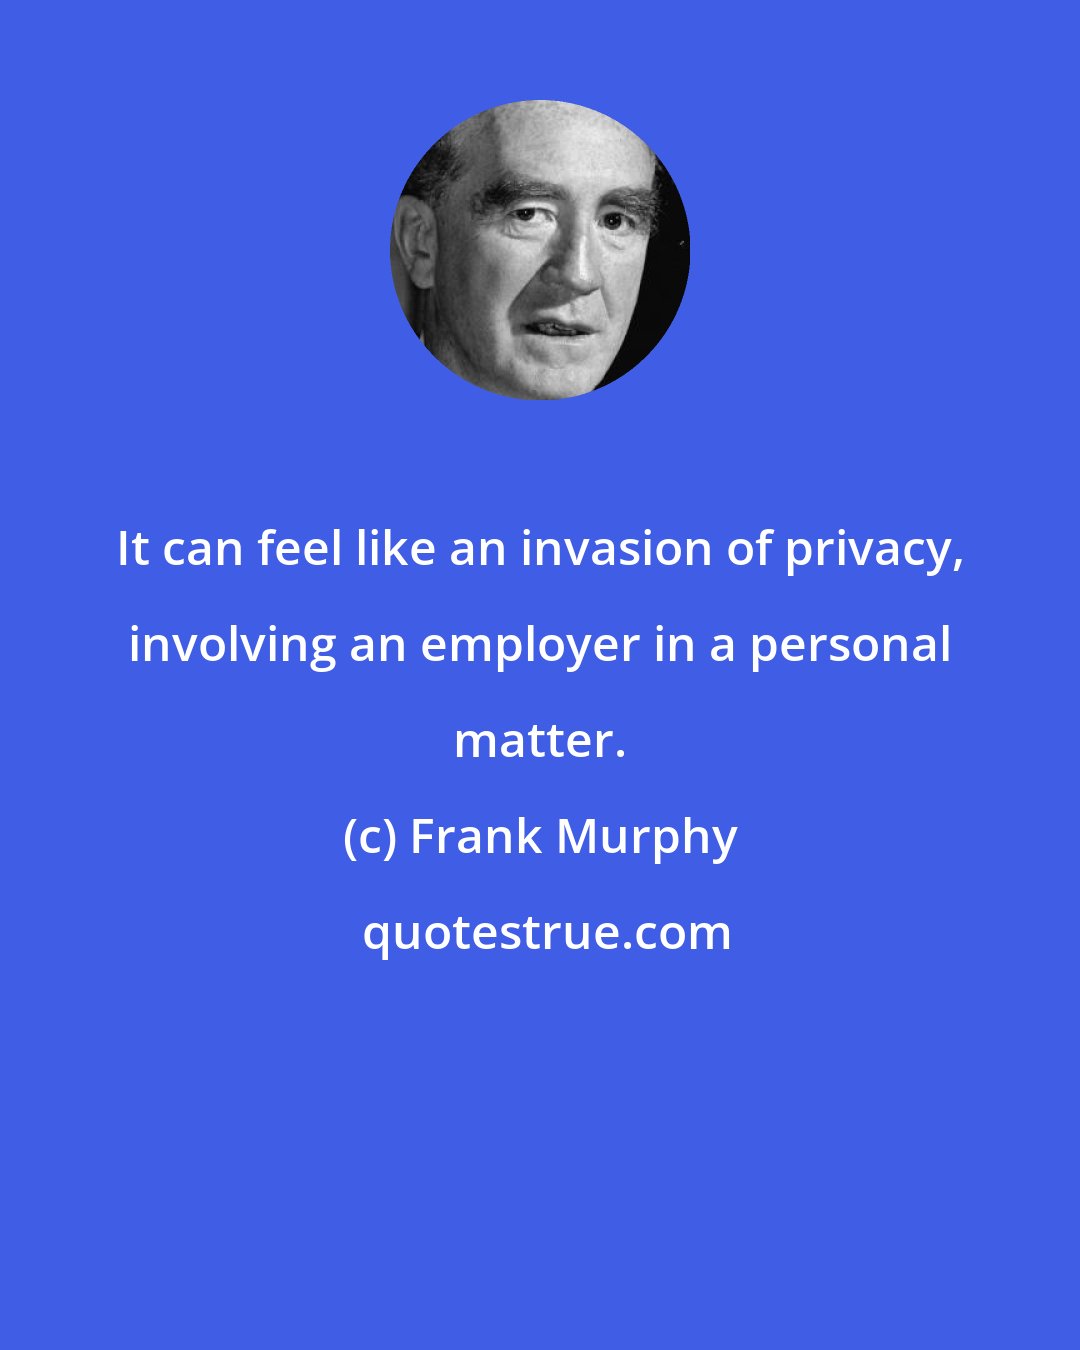 Frank Murphy: It can feel like an invasion of privacy, involving an employer in a personal matter.